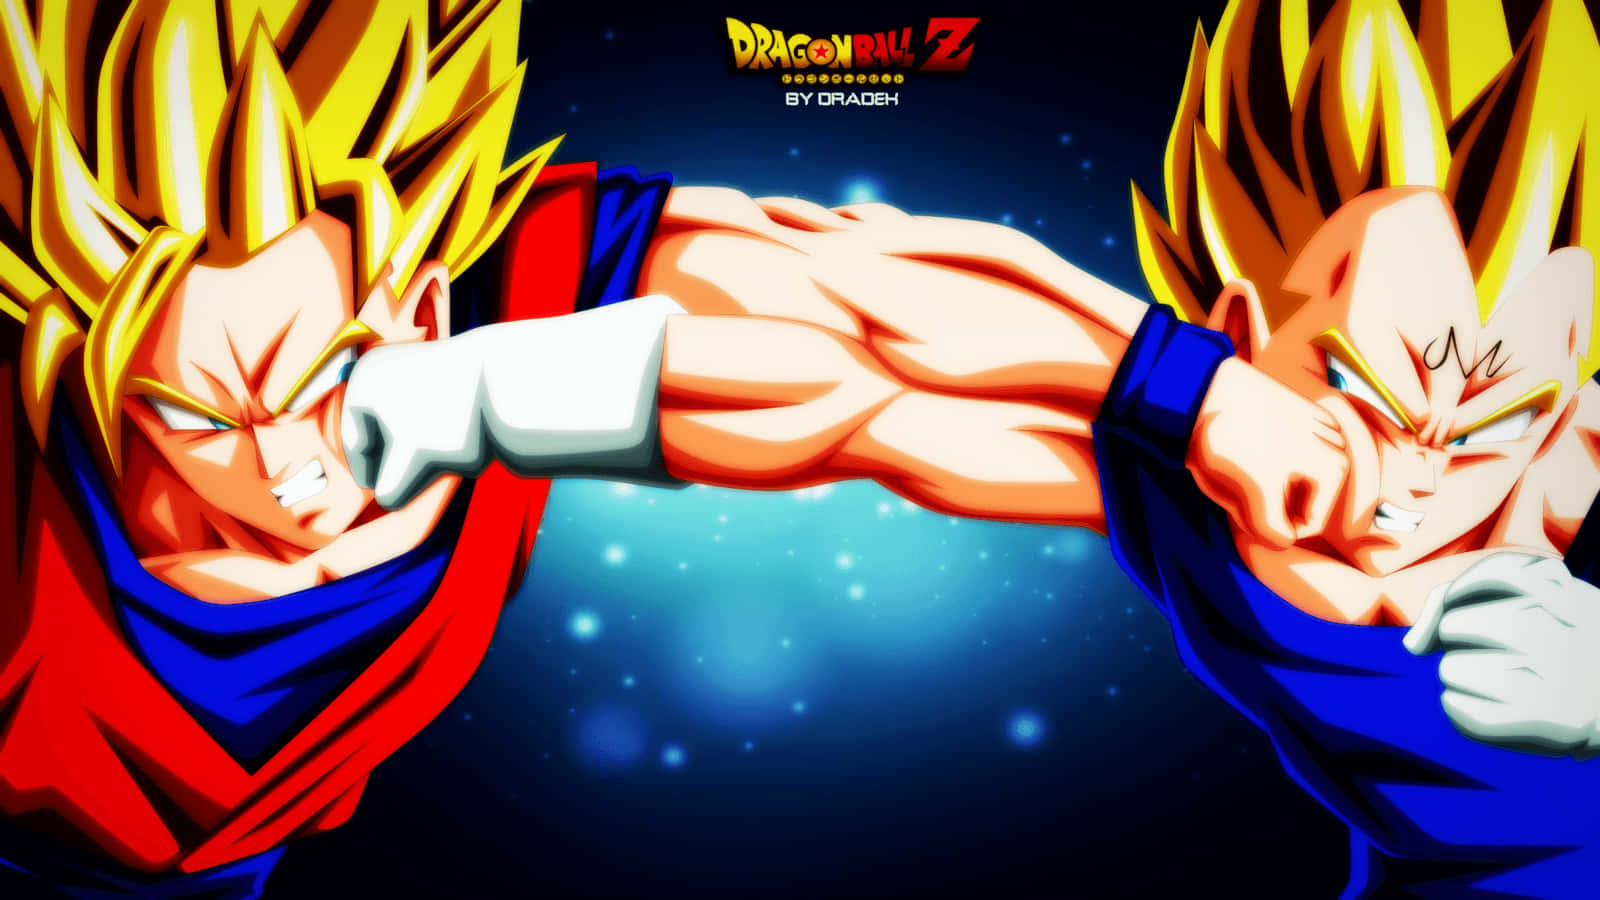 "Majin Vegeta steps into the battlefield, ready to challenge his opponent!" Wallpaper